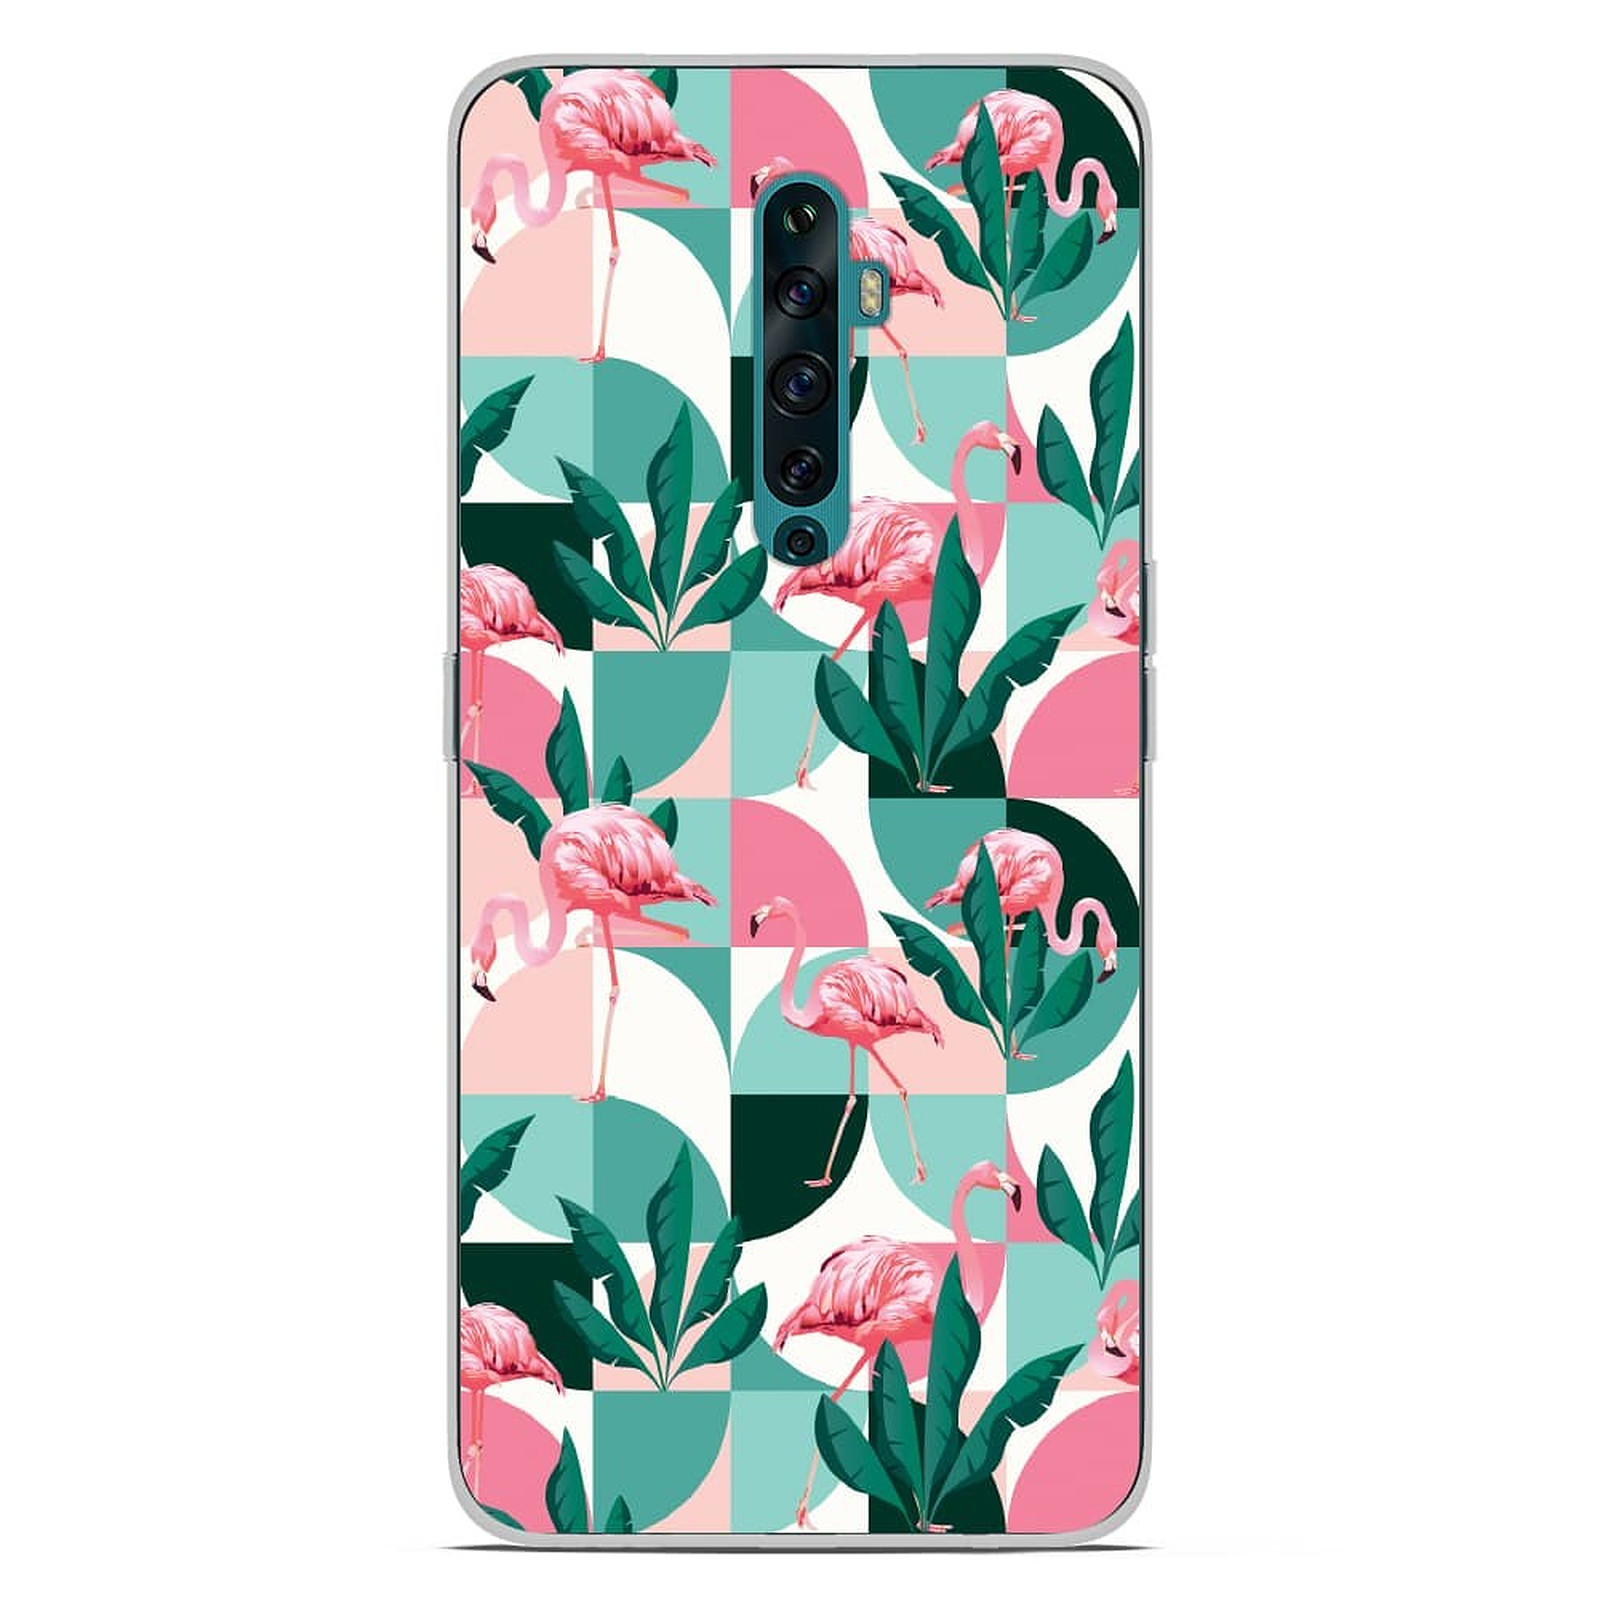 1001 Coques Coque silicone gel Oppo Reno 2Z motif Flamants Roses ge´ome´trique - Coque telephone 1001Coques